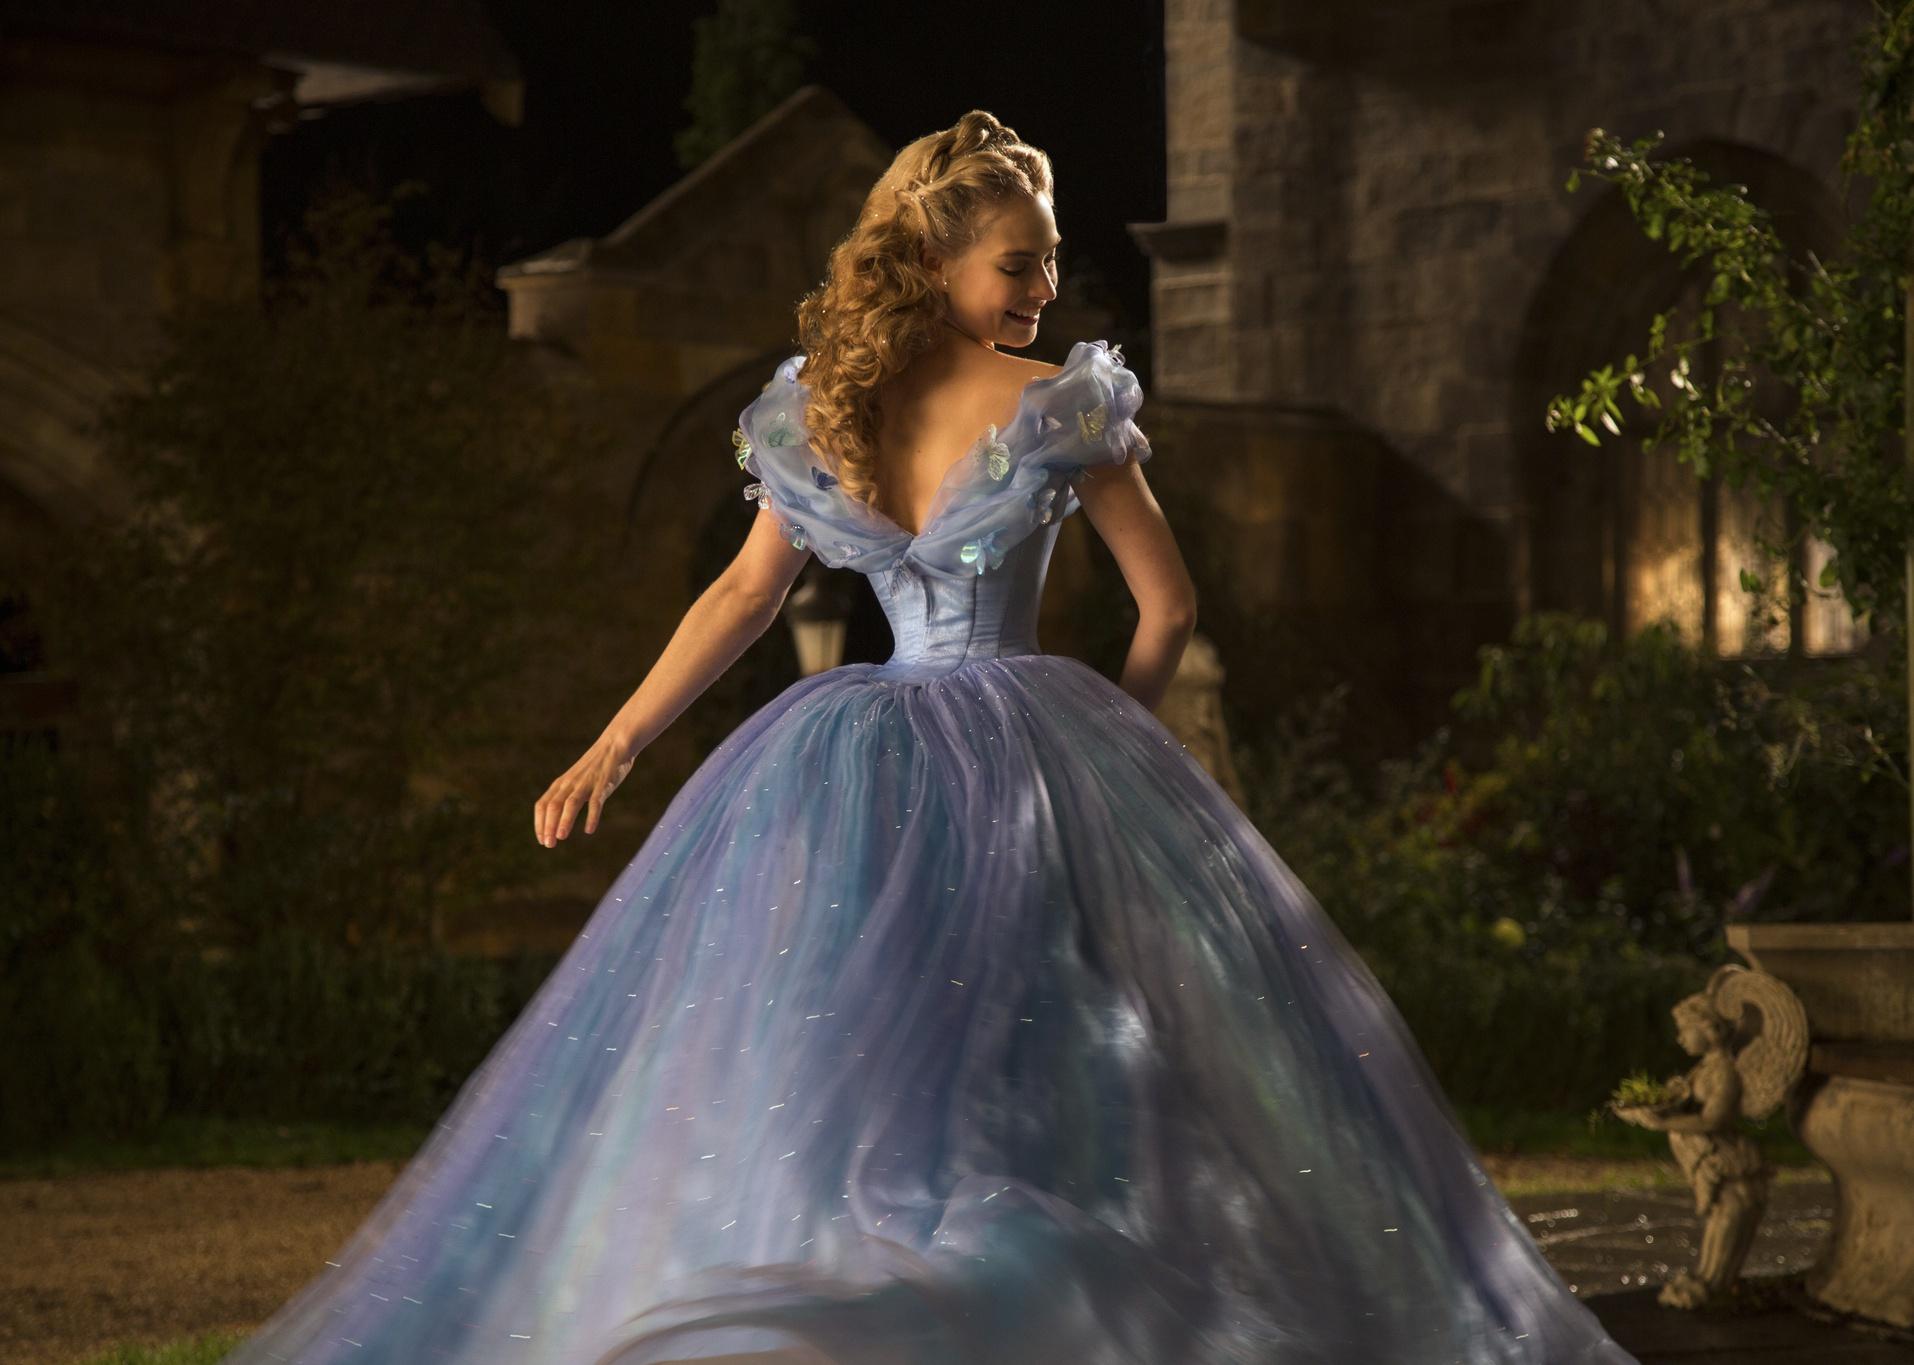 Lily James as Cinderella twirling around in a blue ballgown in a courtyard.